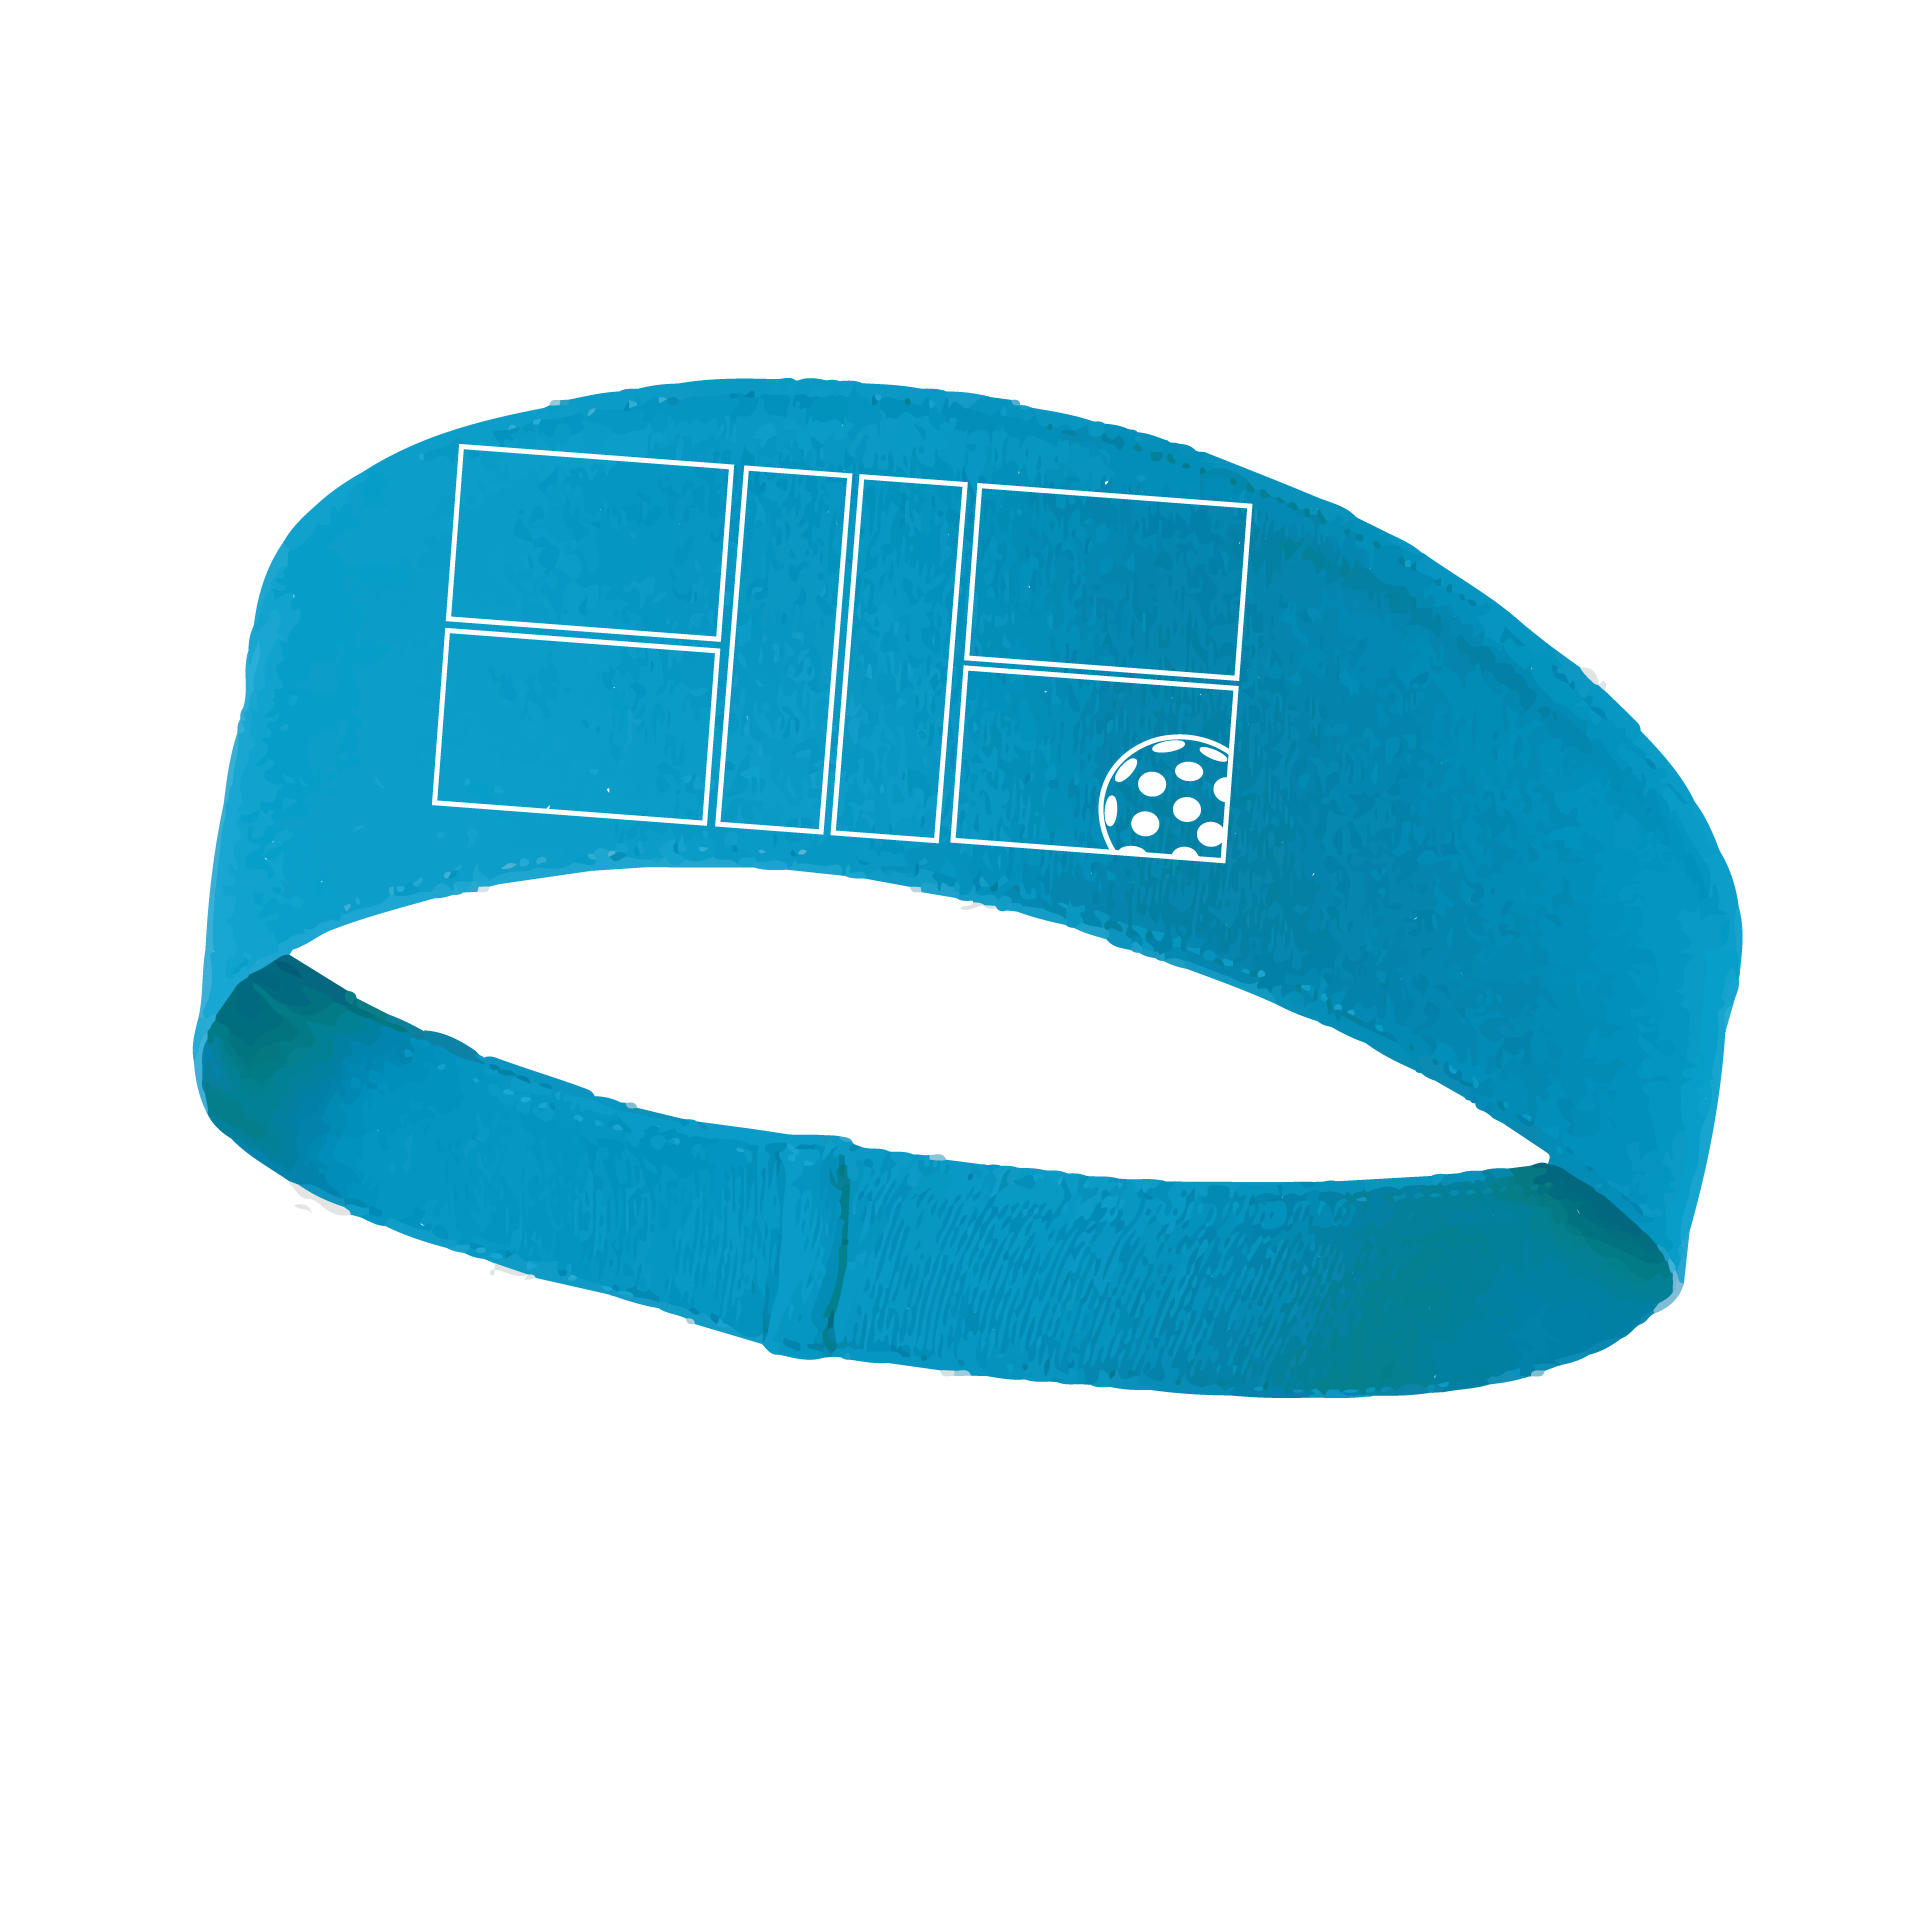 Pickleball Design: Pickleball Court with Corner Ball in White  This fun, pickleball designed, moisture-wicking headband narrows in the back to fit more securely. Single-needle top-stitched edging. These headbands come in a variety of colors. Truly shows your love for the sport of pickleball!!